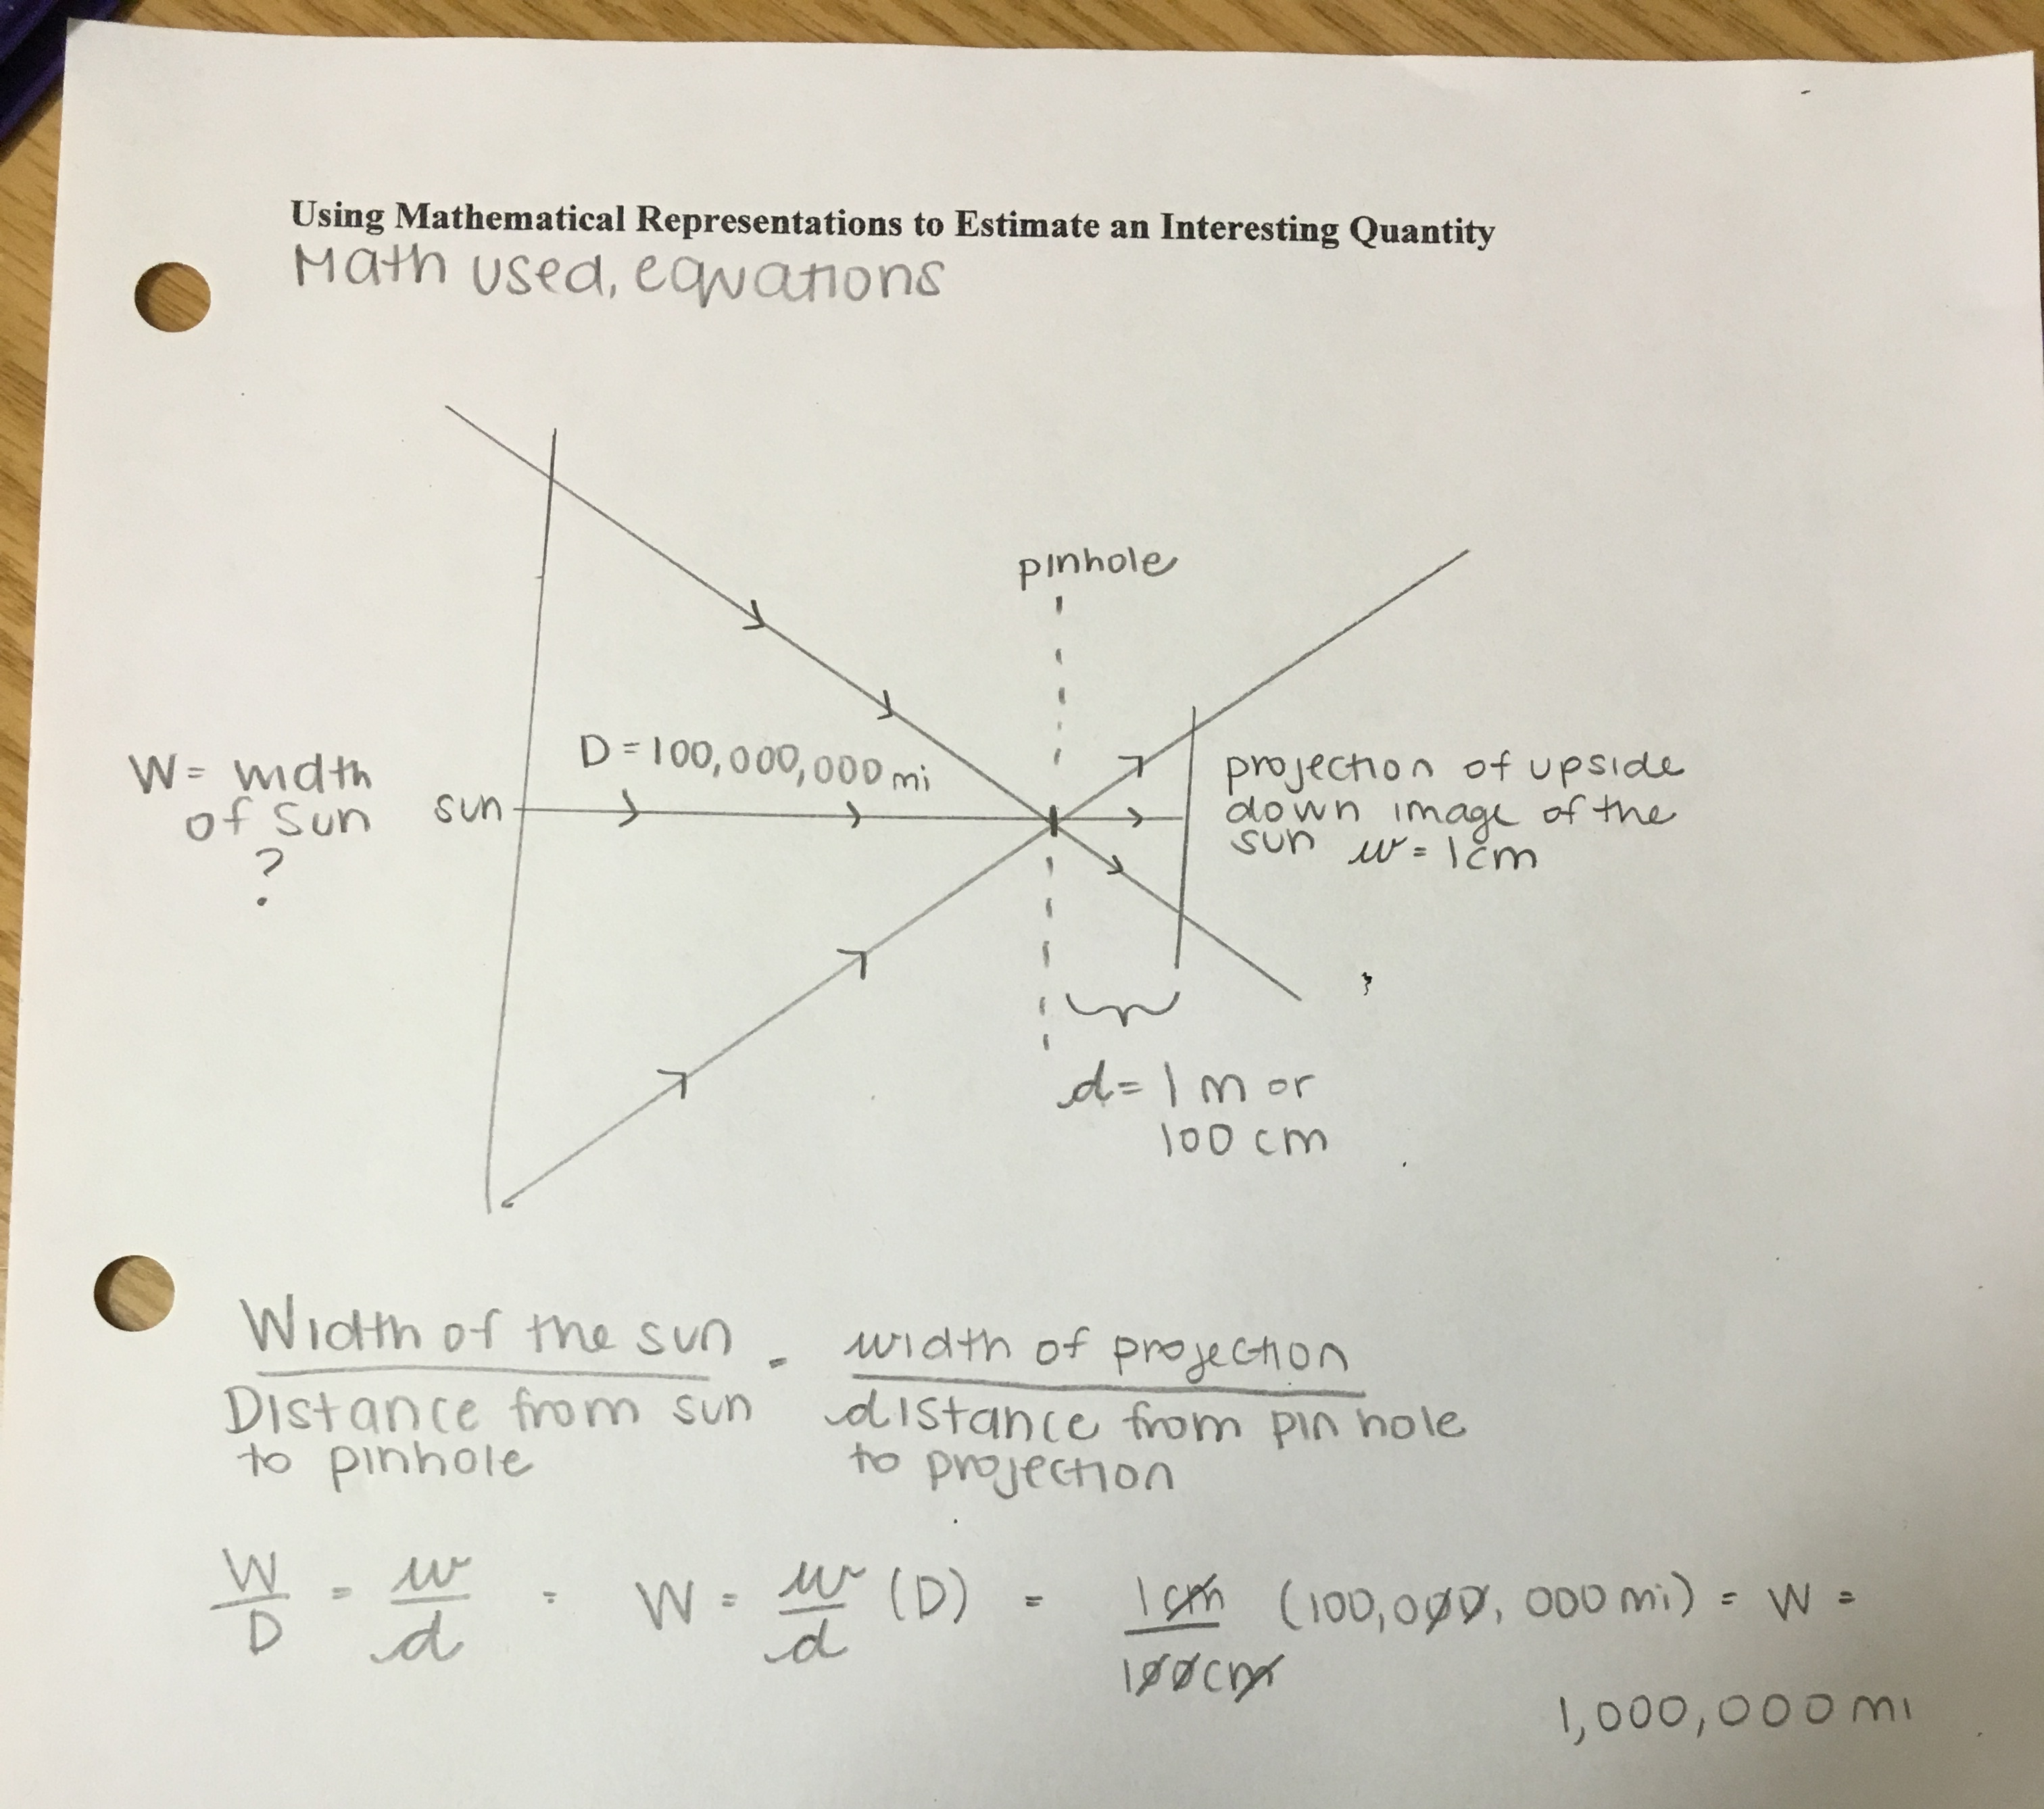 Student ray diagram and relevant mathematics for estimating the diameter of the Sun.